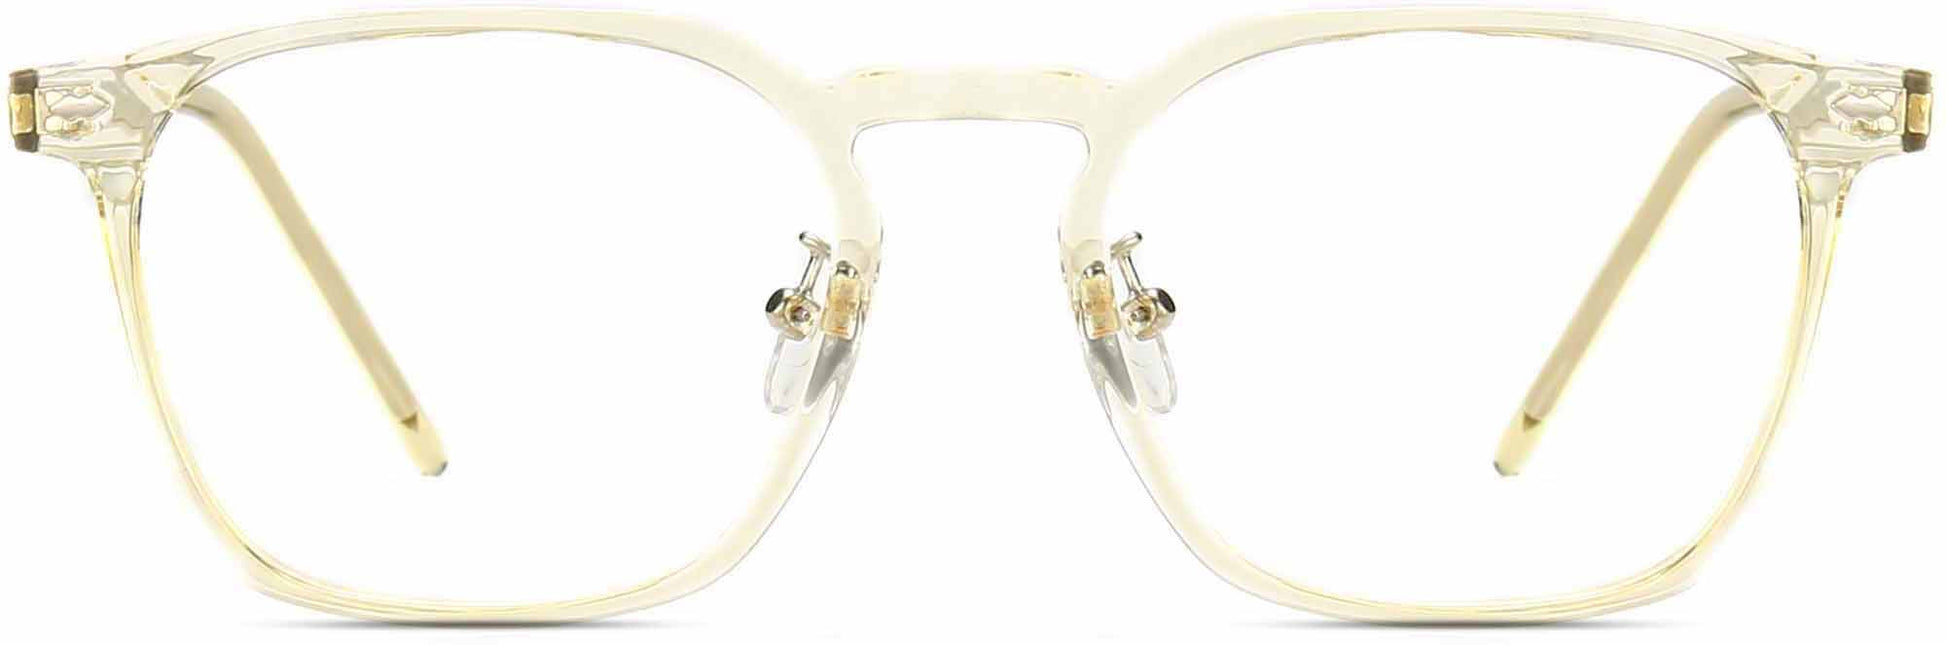 Biblio Square Clear Eyeglasses from ANRRI, front view